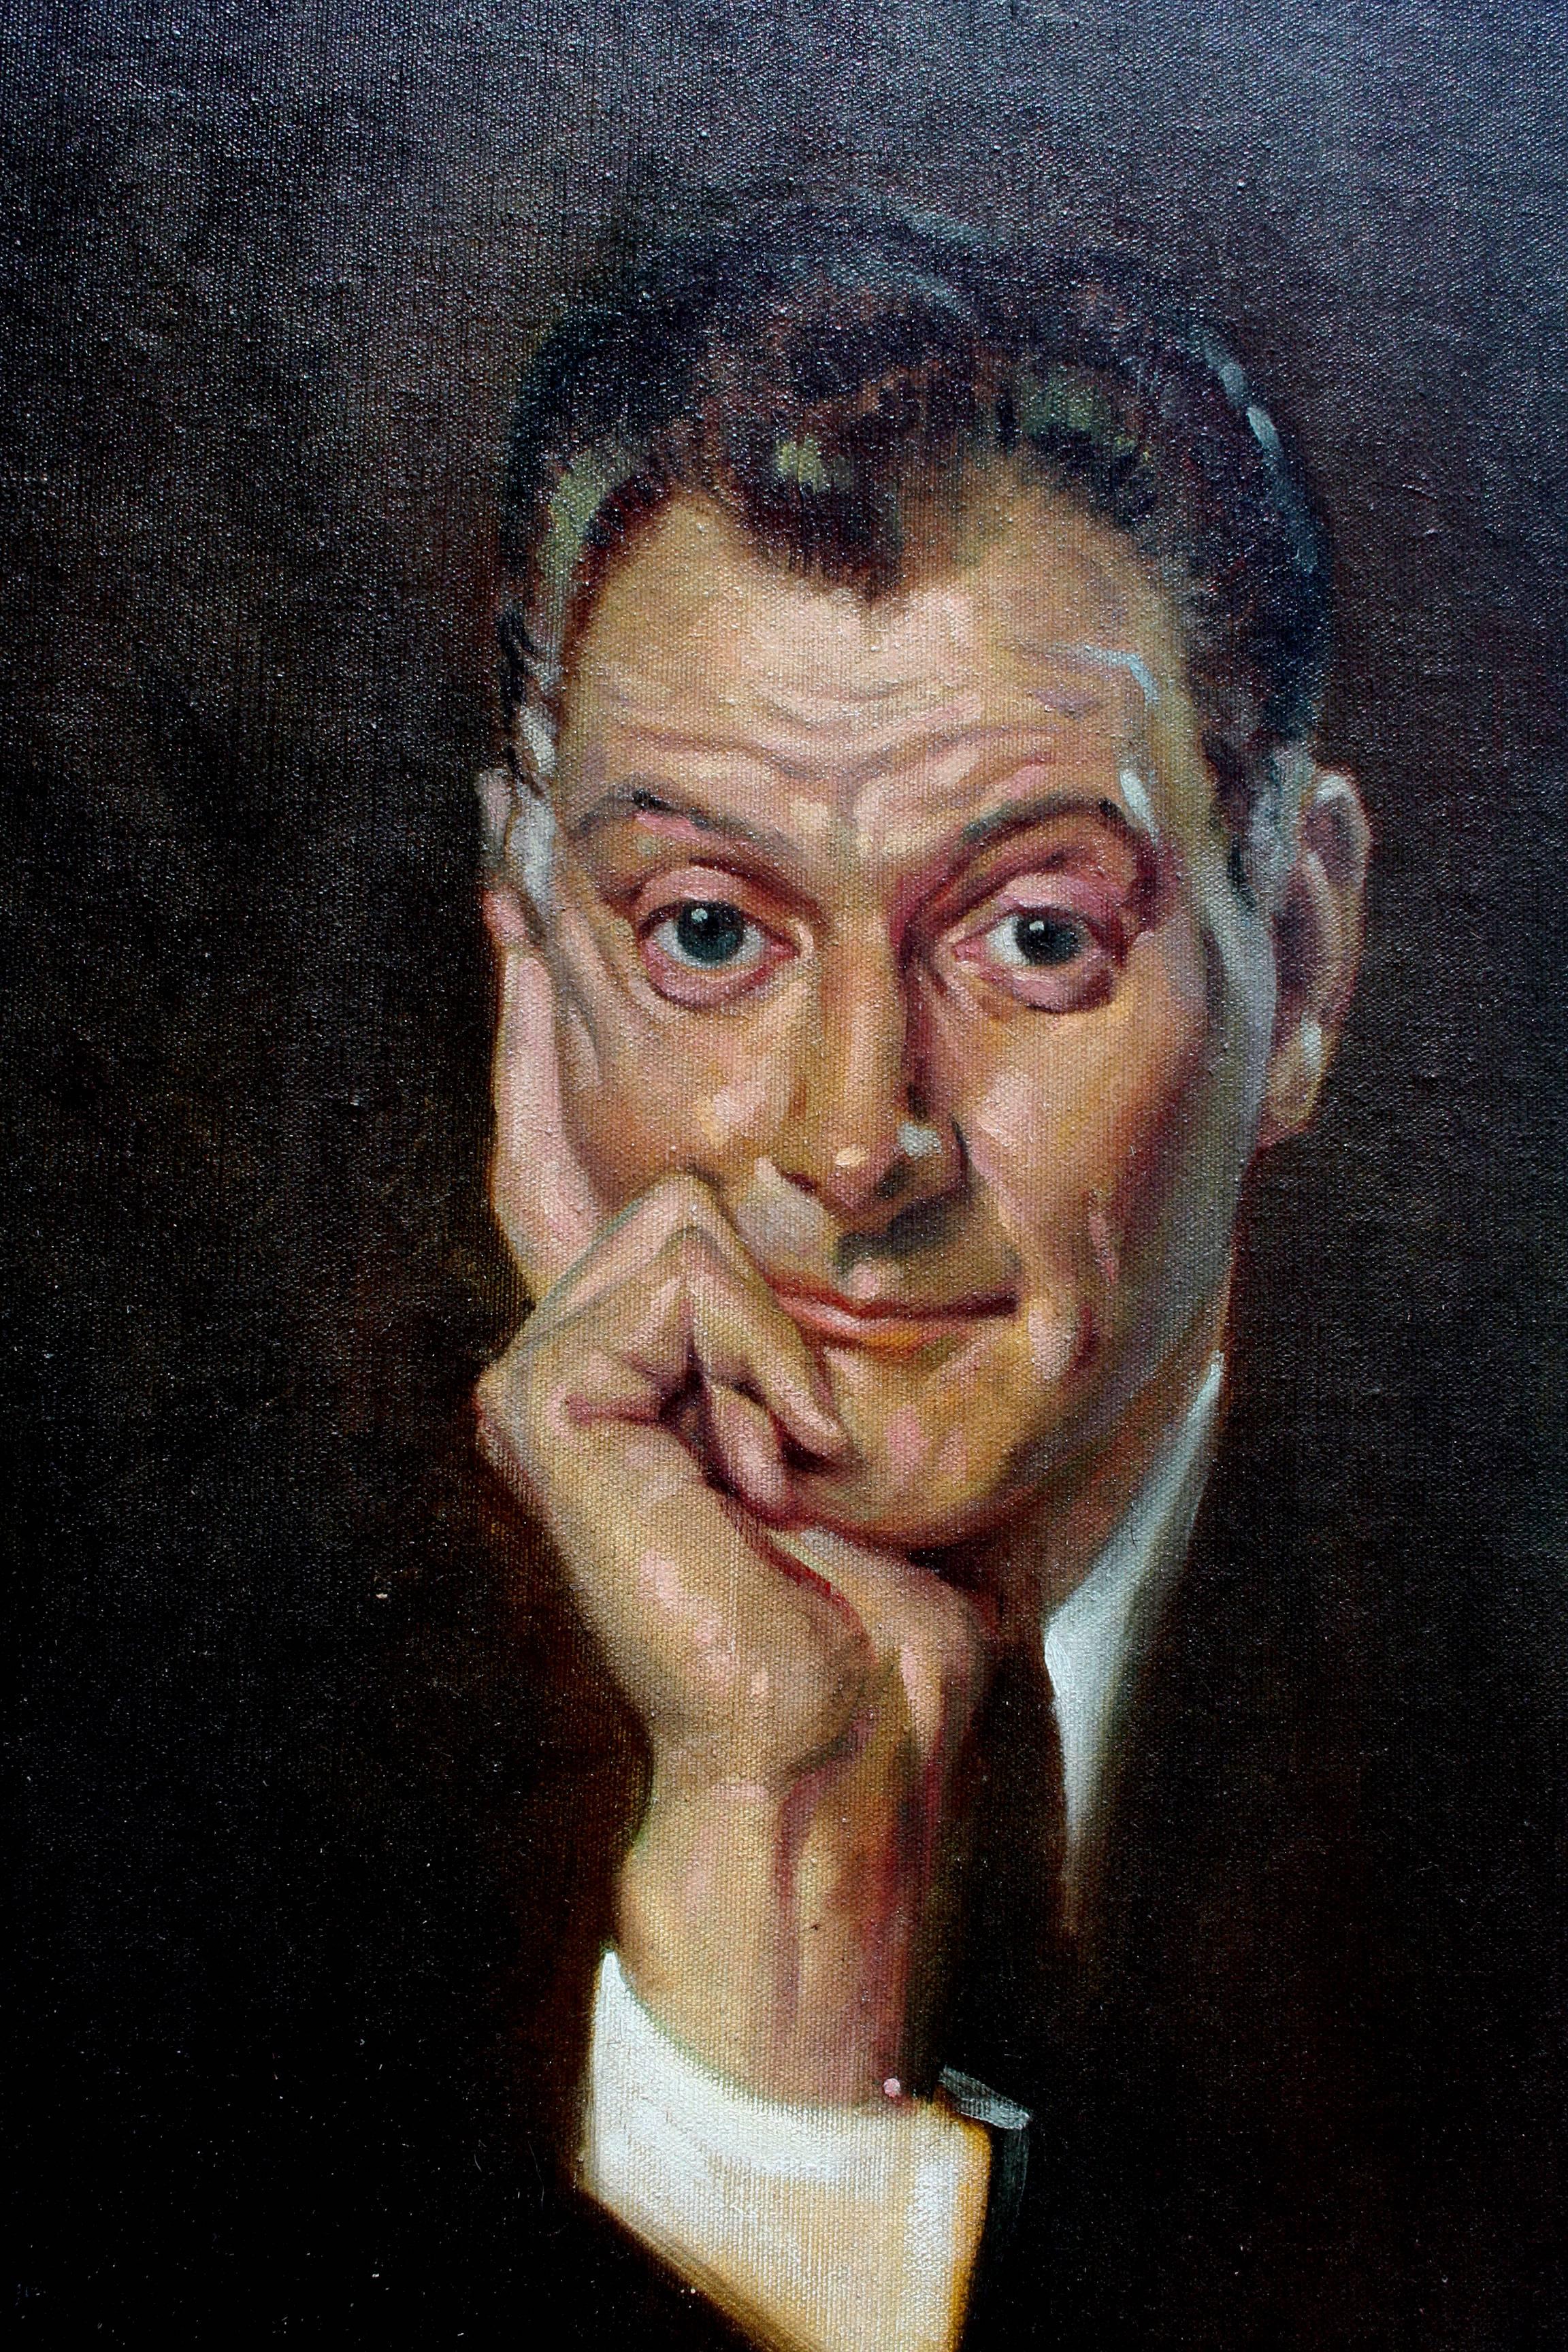 Portrait of Hollywood personality Art Carney by Snowden a Hollywood artist active during the 1940's and 1950's. Signed 